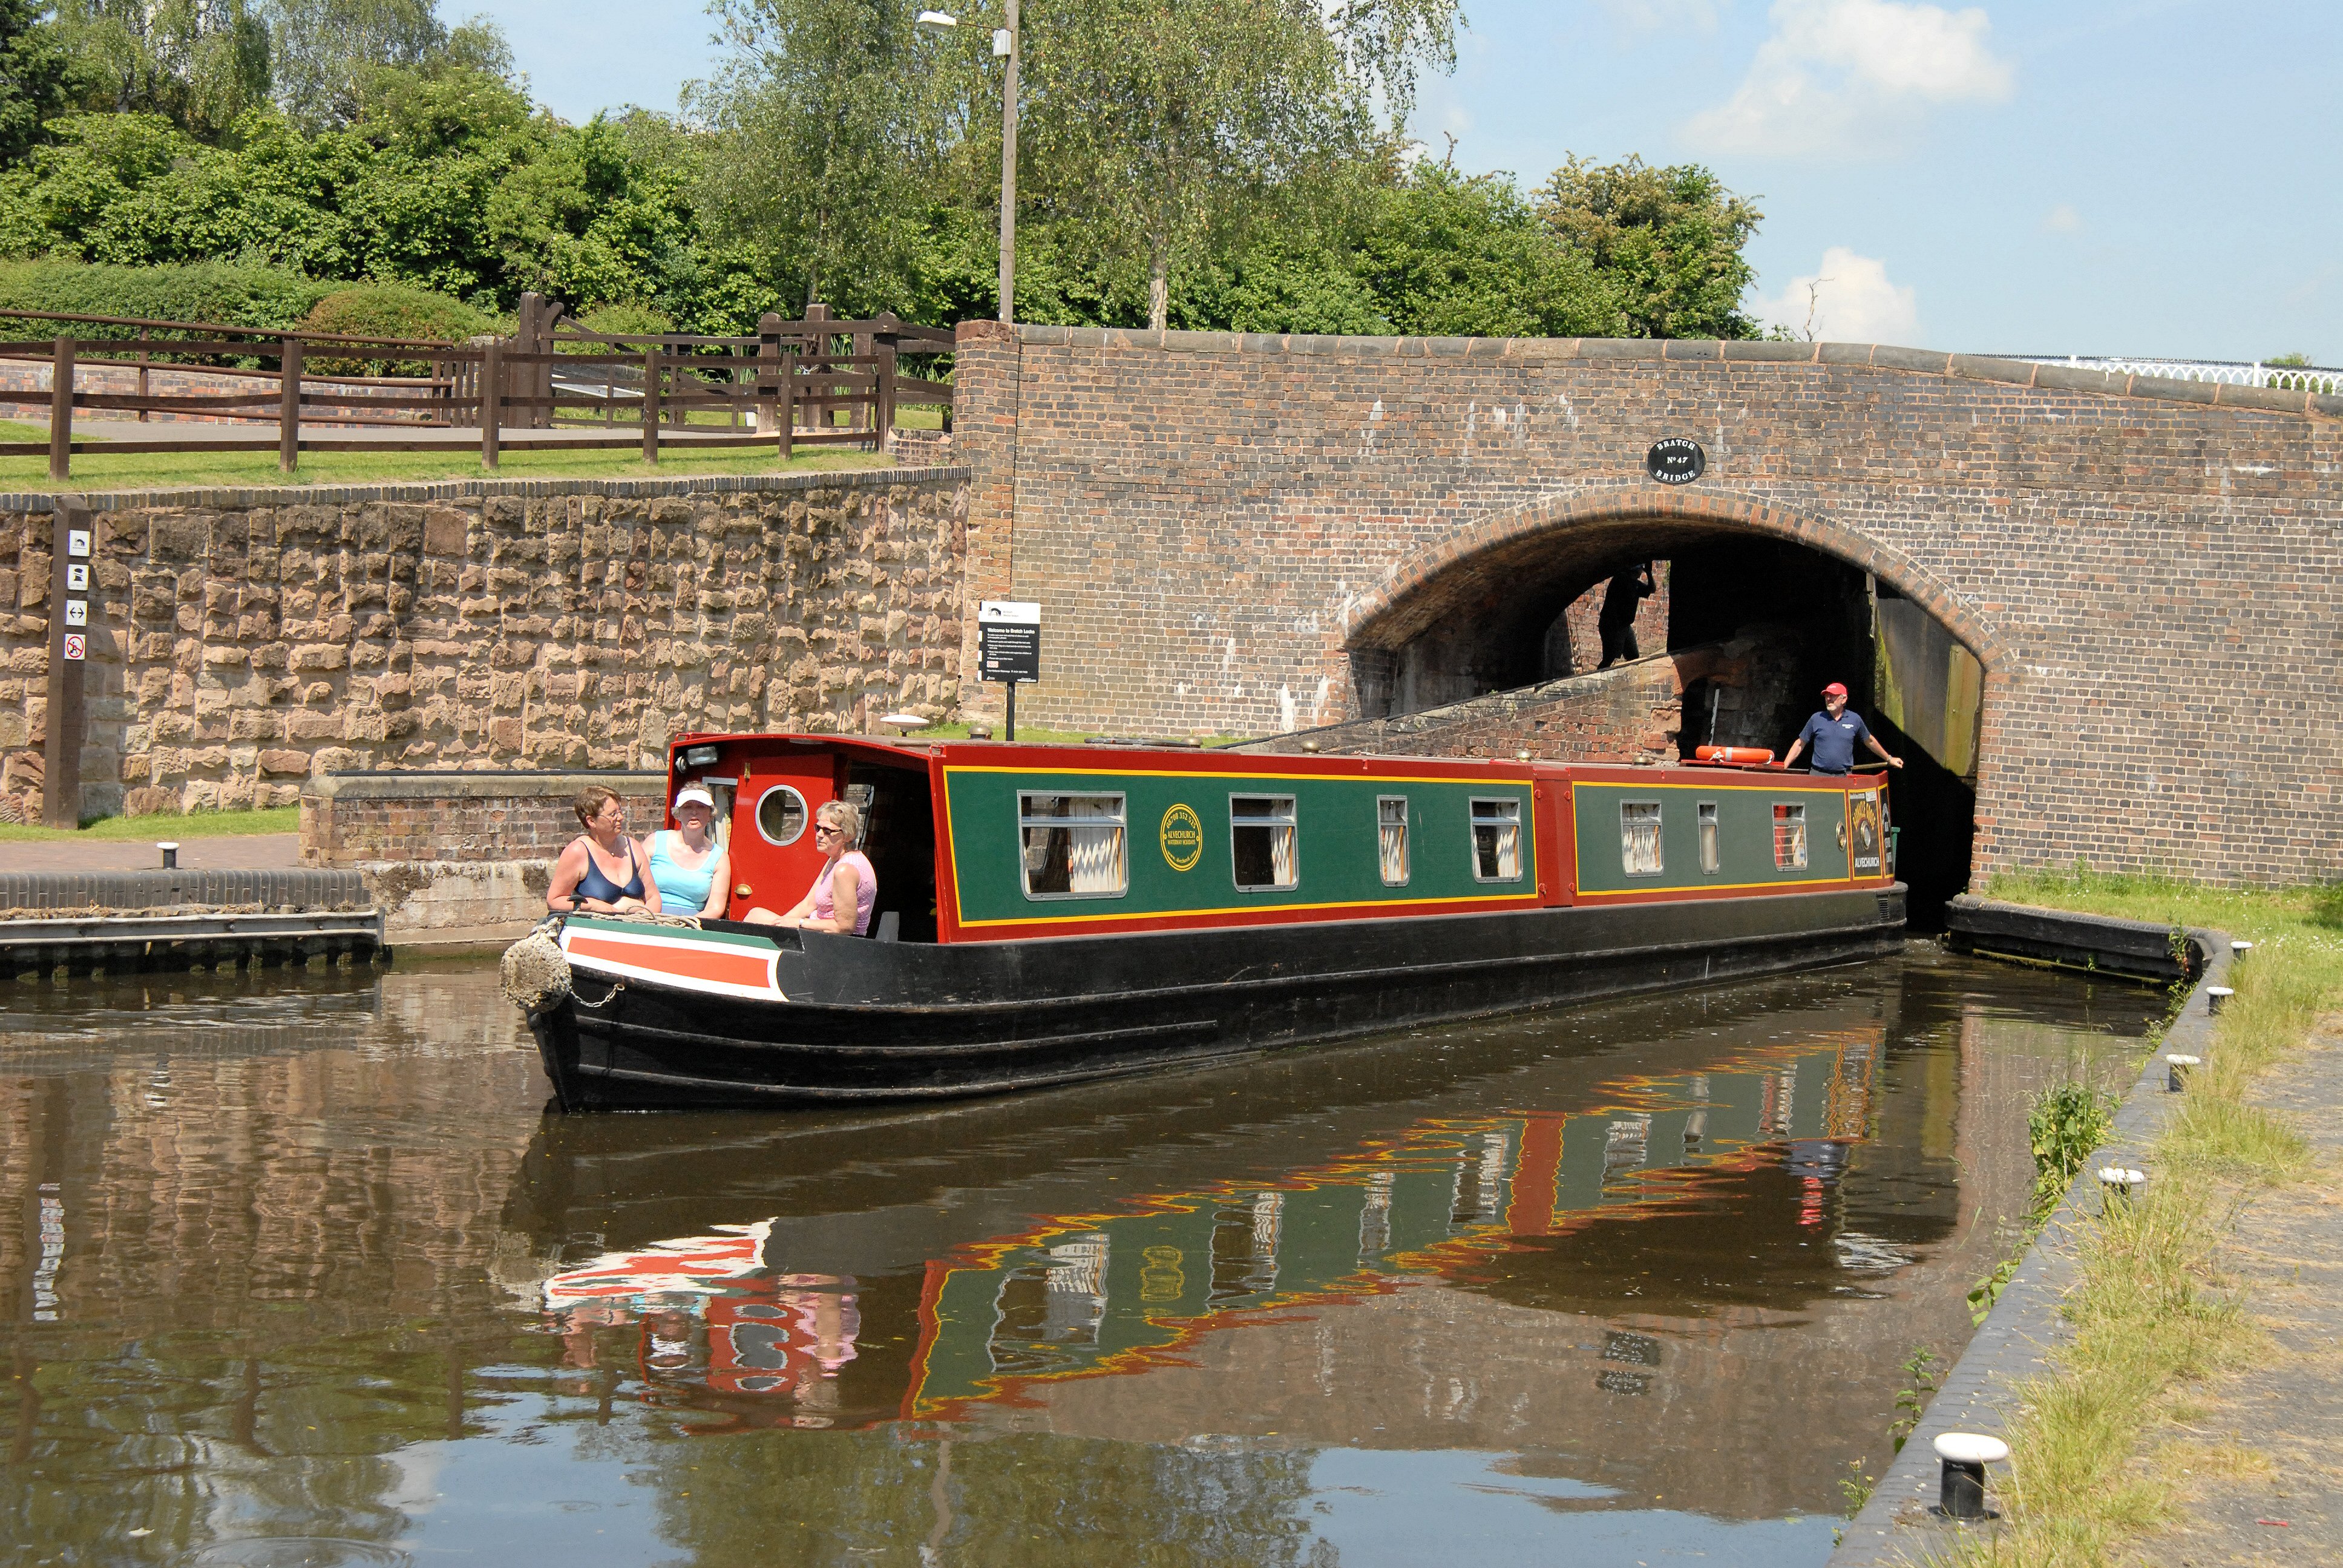 The Red Breasted Goose canal boat operating out of Alvechurch